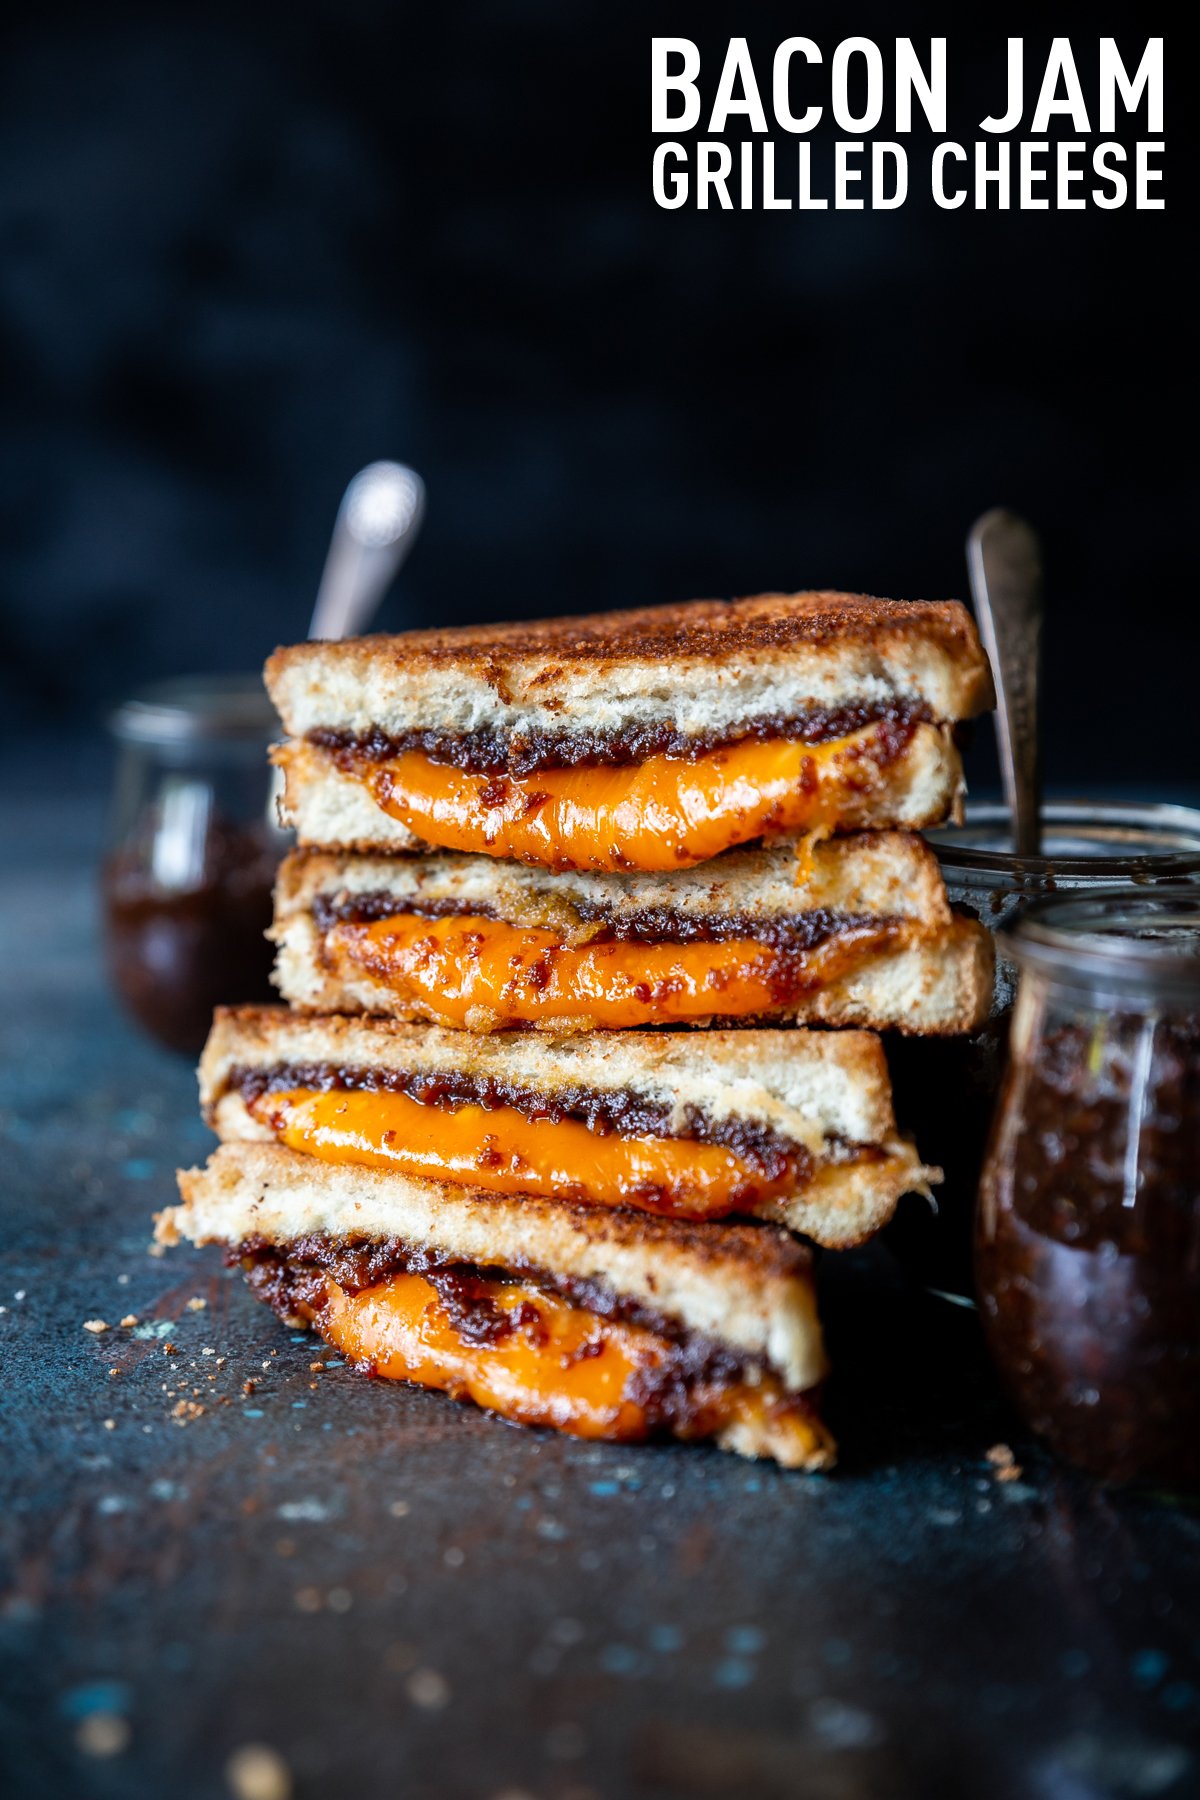 Bacon jam in small tulip jars, spoon with bacon jam on it, bacon jam grilled cheese triangles stacked on each other